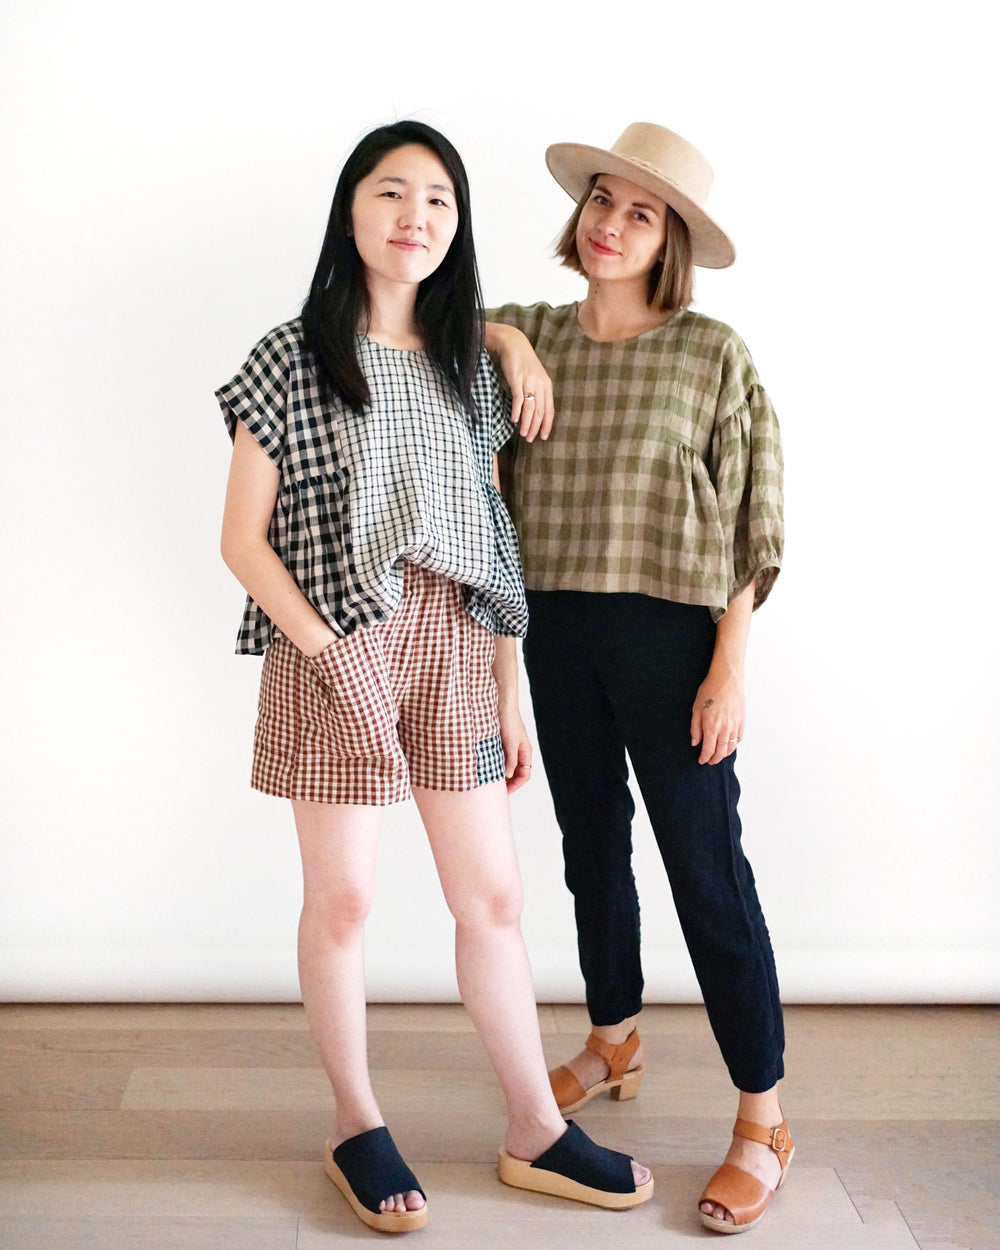 Women wearing the Collage Gather Top sewing pattern from Matchy Matchy Sewing Club on The Fold Line. A top pattern made in light to medium weight woven fabrics, featuring a round neck, boxy silhouette, slightly cropped length, gathered side panels, cuff o